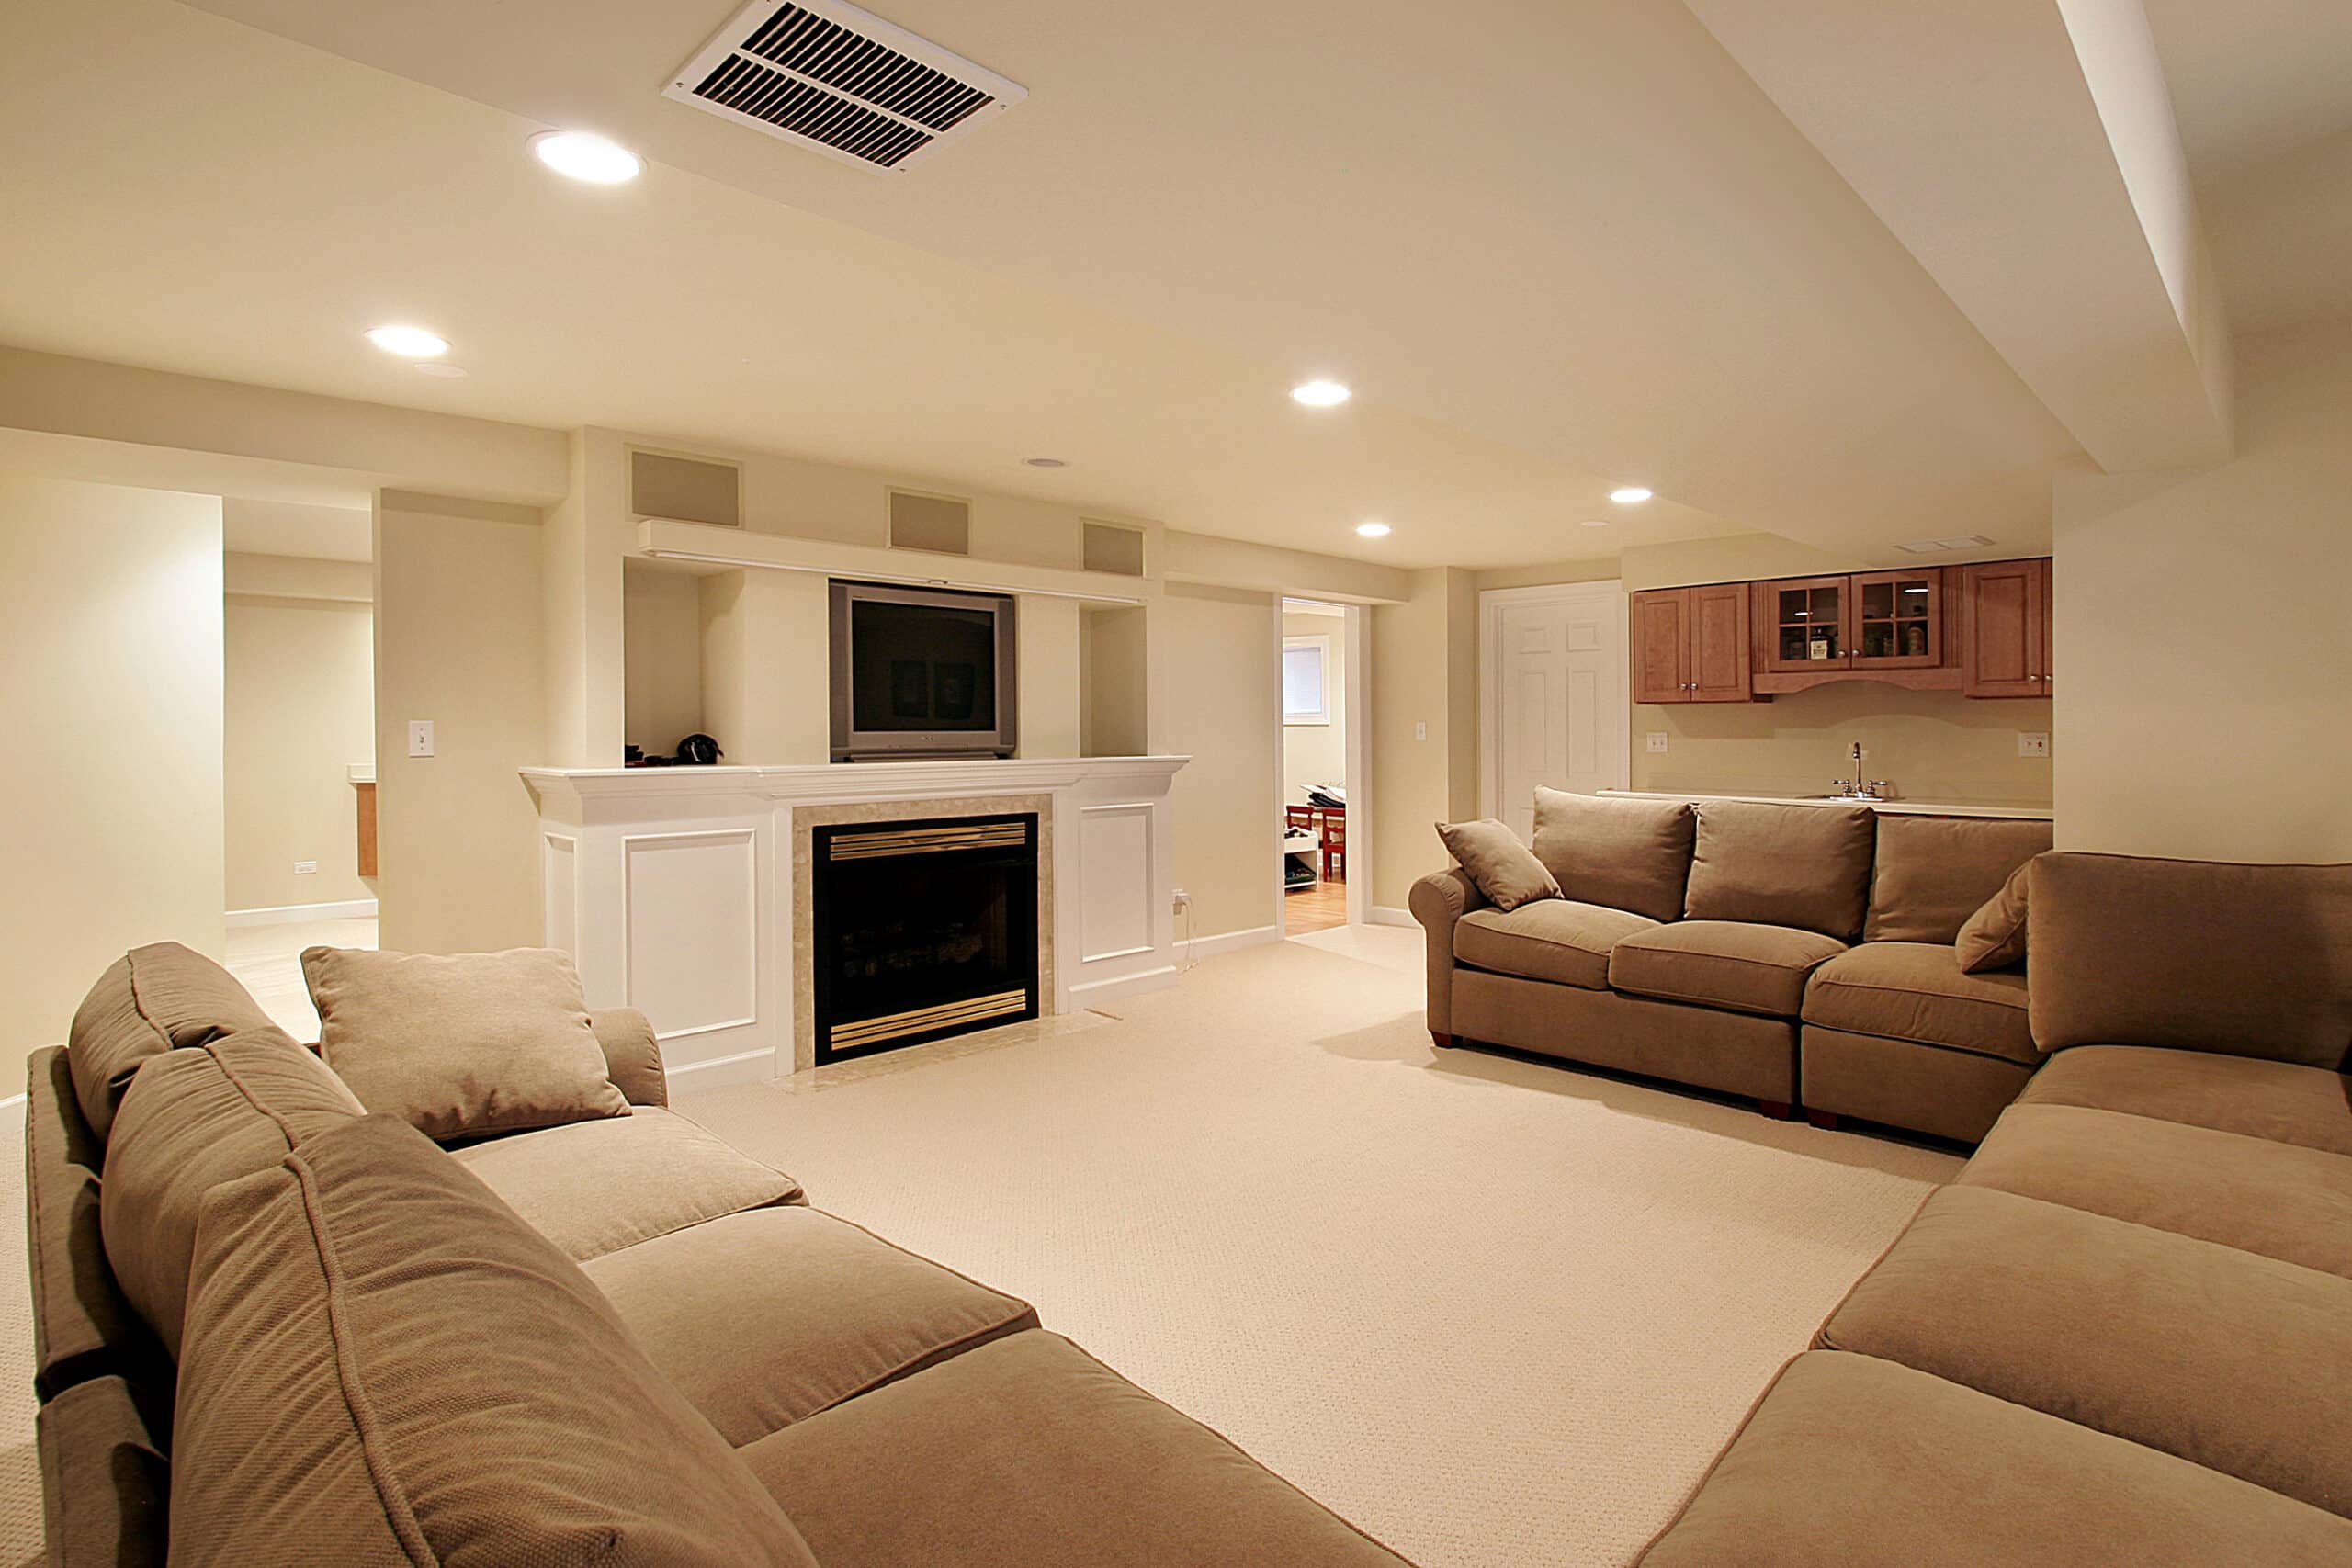 Basement in luxury home with white fireplace